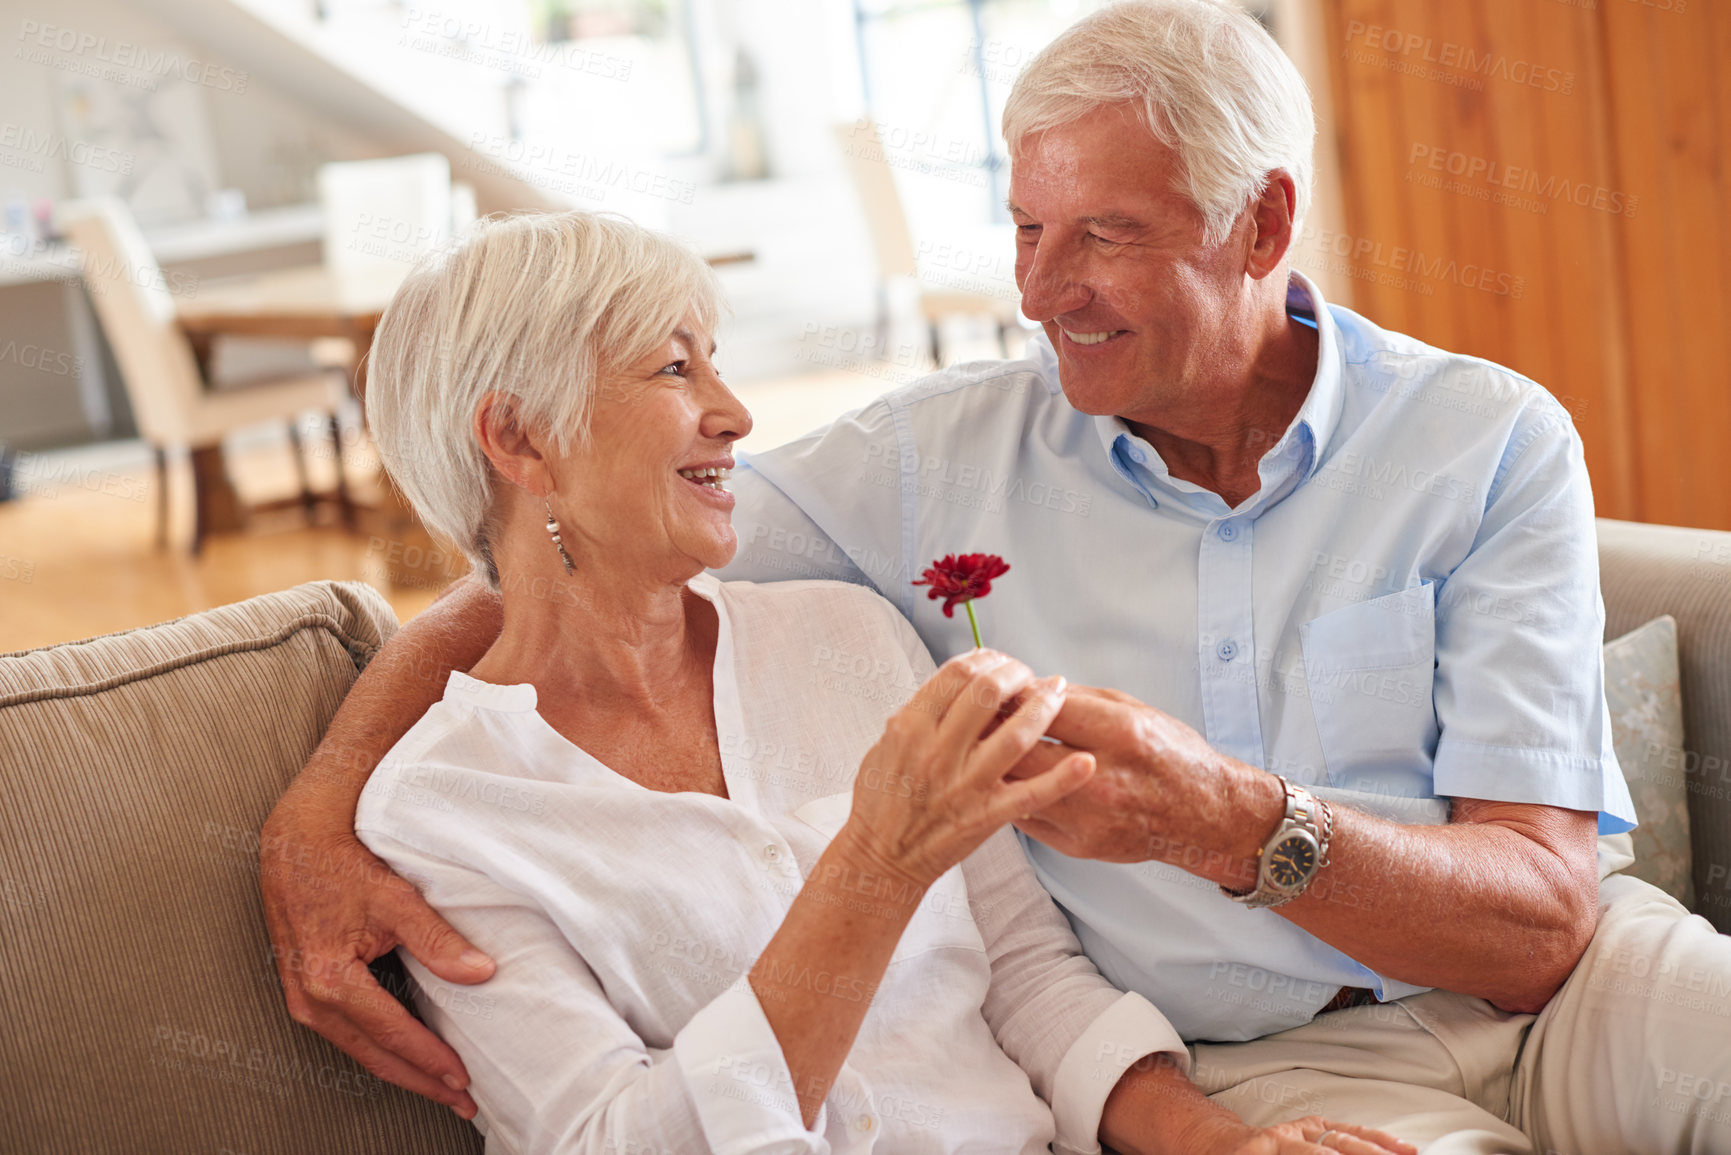 Buy stock photo Shot of a senior man giving his wife a flower